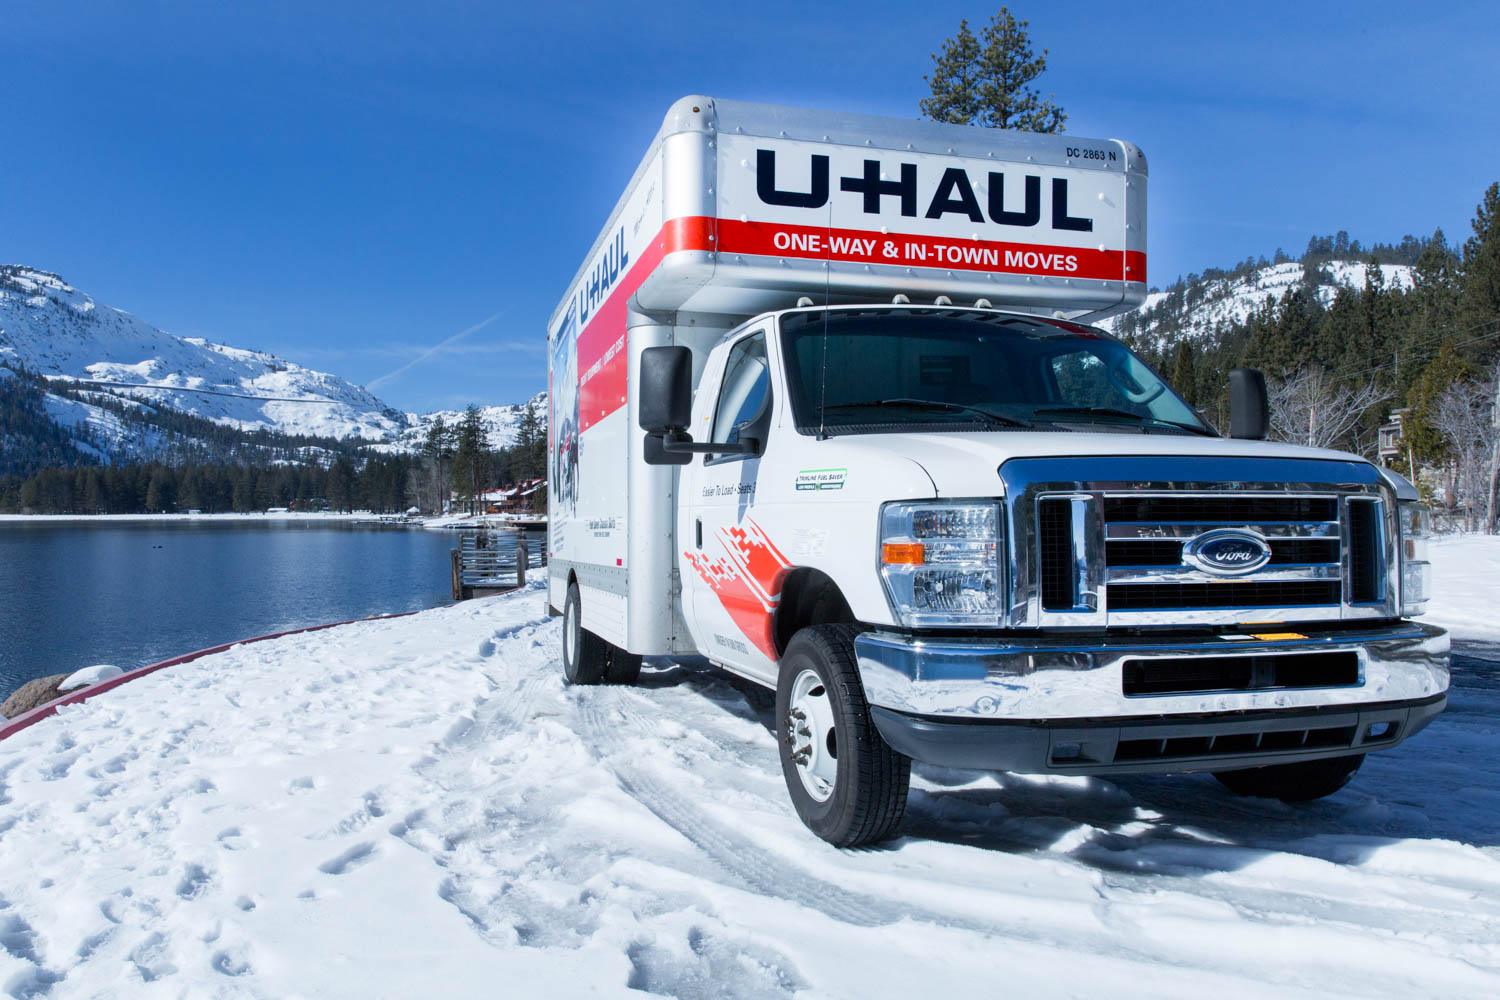 VERMONT is U-Haul No. 10 Growth State for 2019